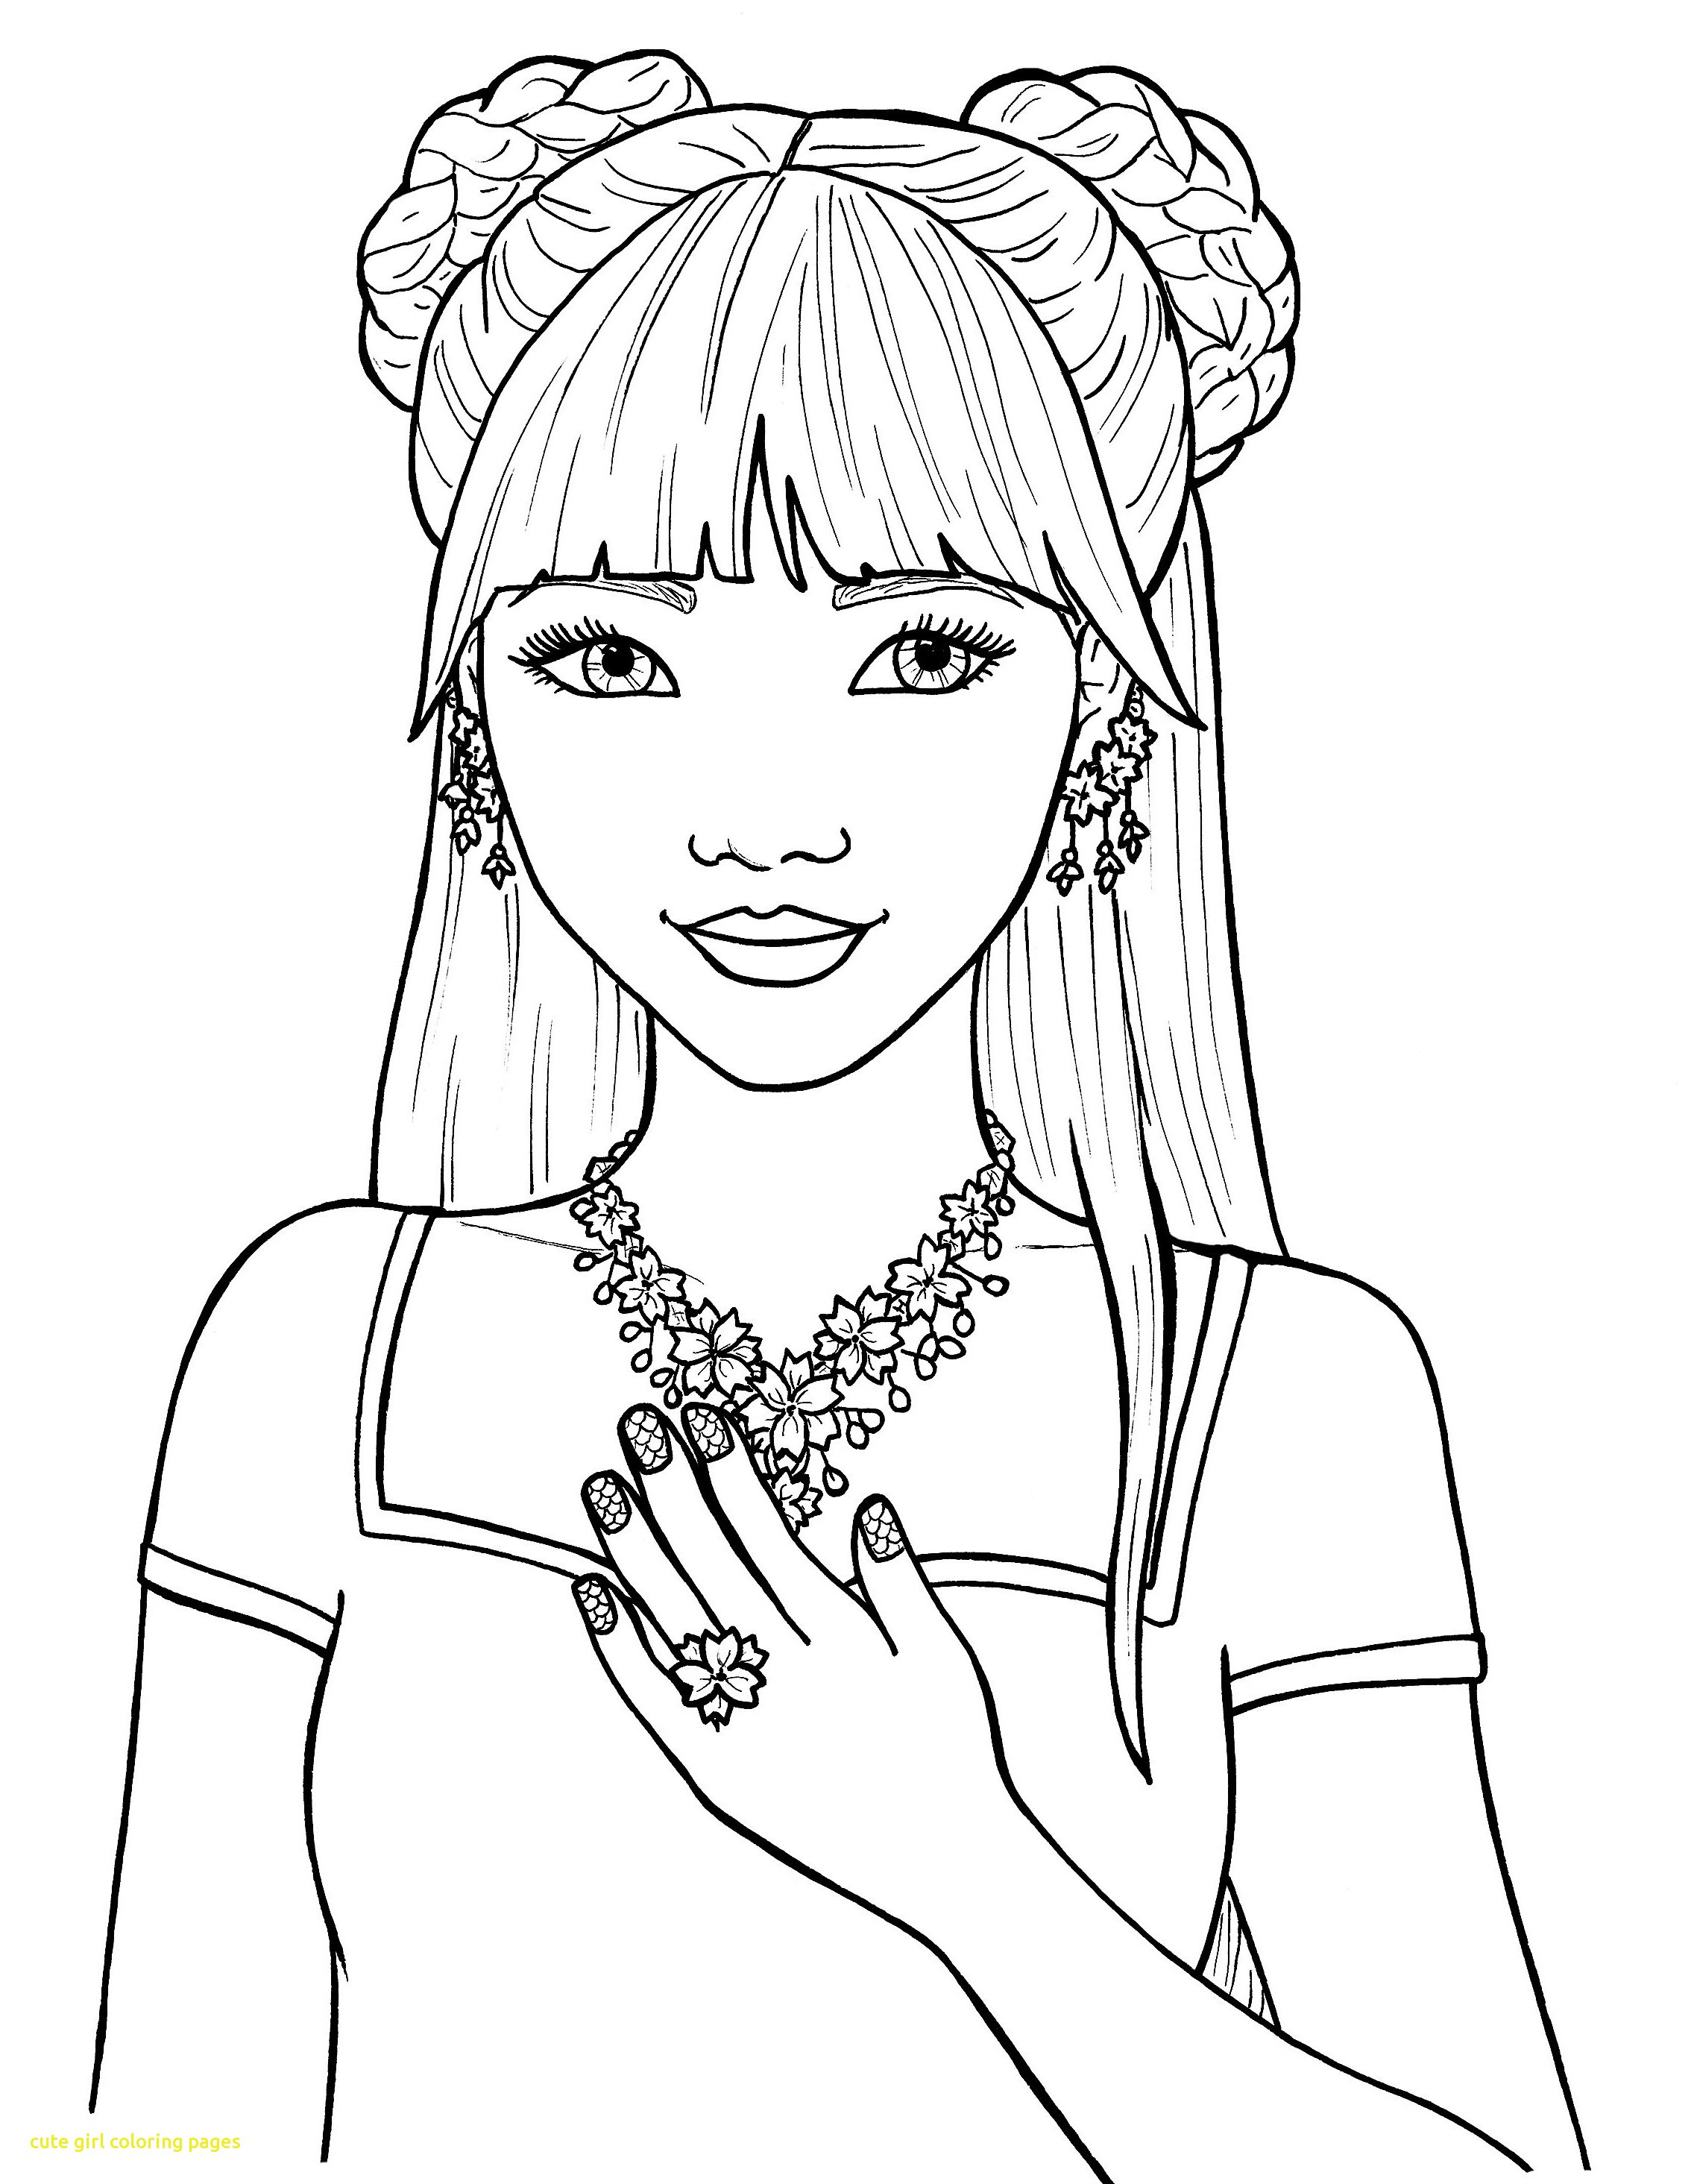 Coloring Pages Of Girl
 Coloring Pages for Girls Best Coloring Pages For Kids